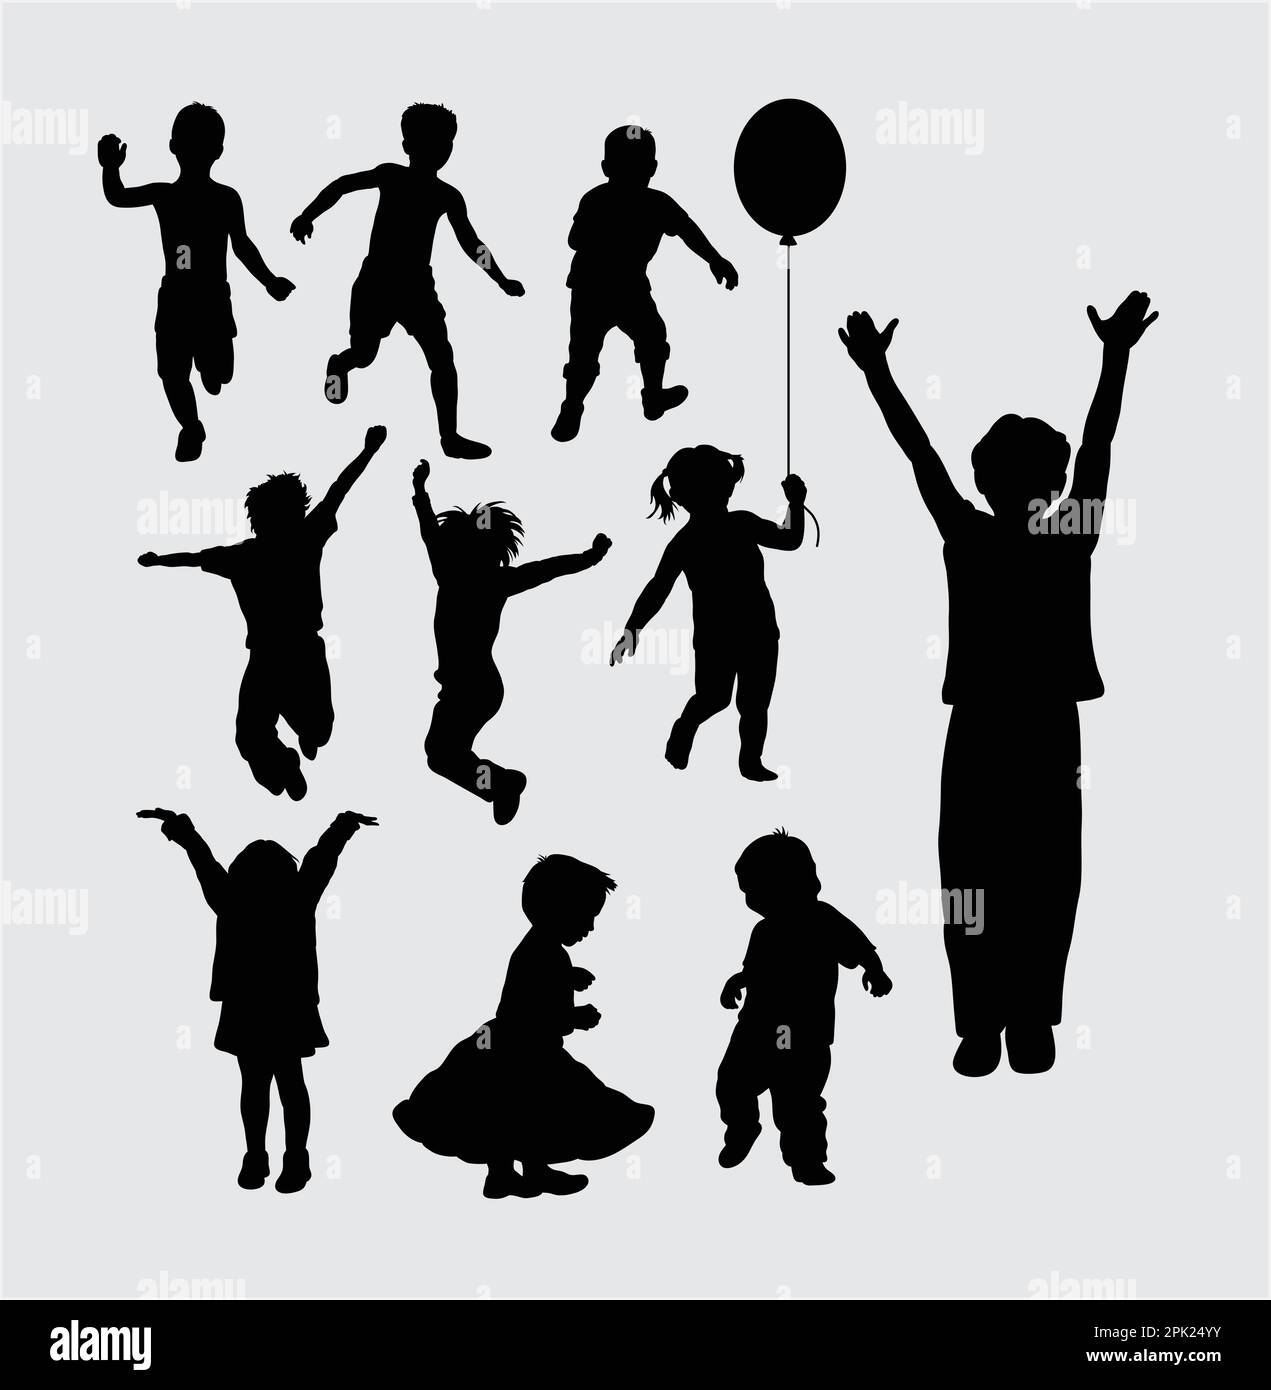 Kid playing silhouettes Stock Vector